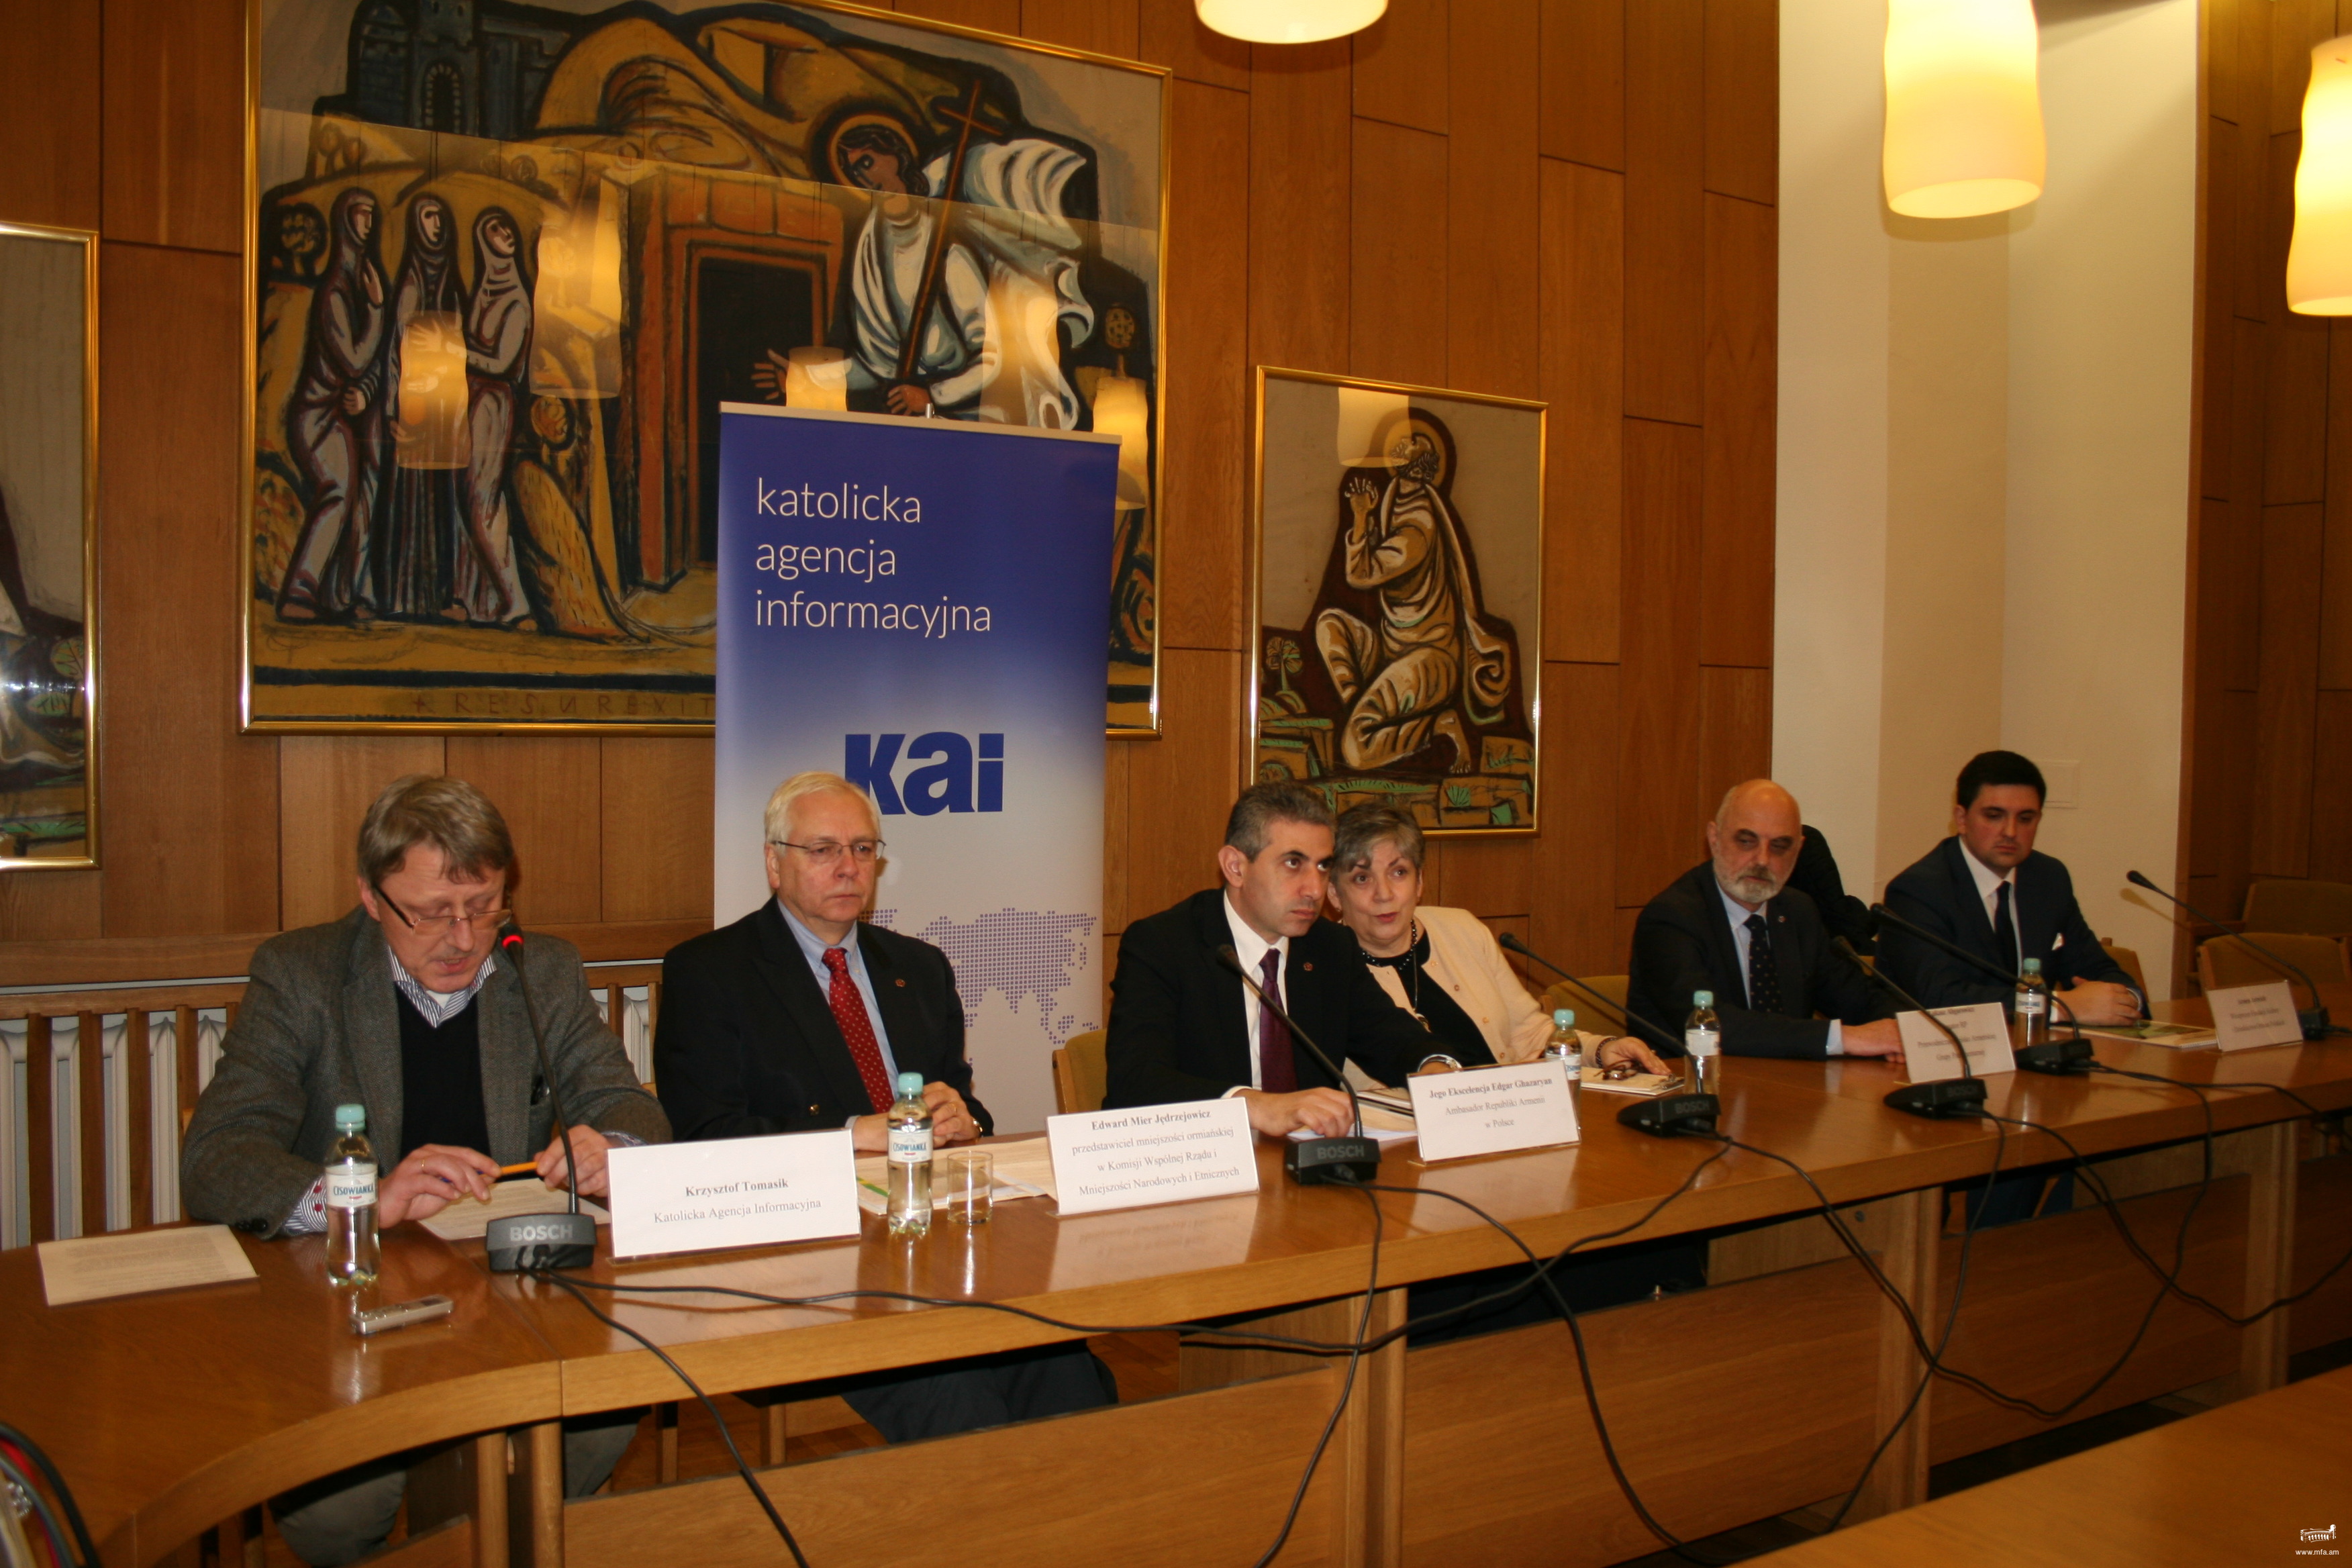 Press-conference dedicated to the Centennial of the Armenian Genocide held in Warsaw